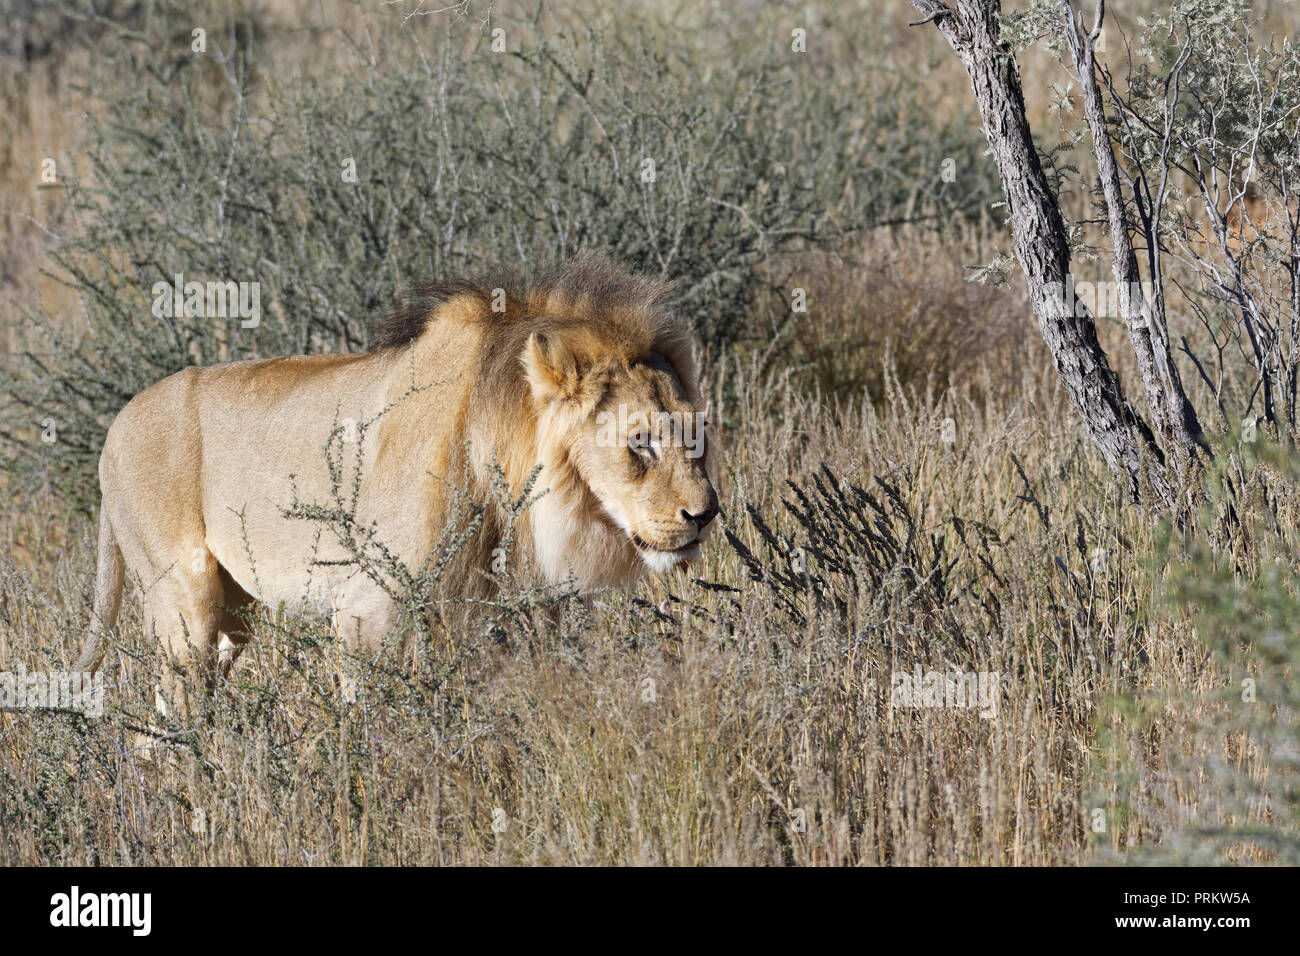 African lion (Panthera leo), adult male walking in high dry grass, Kgalagadi Transfrontier Park, Northern Cape, South Africa, Africa Stock Photo